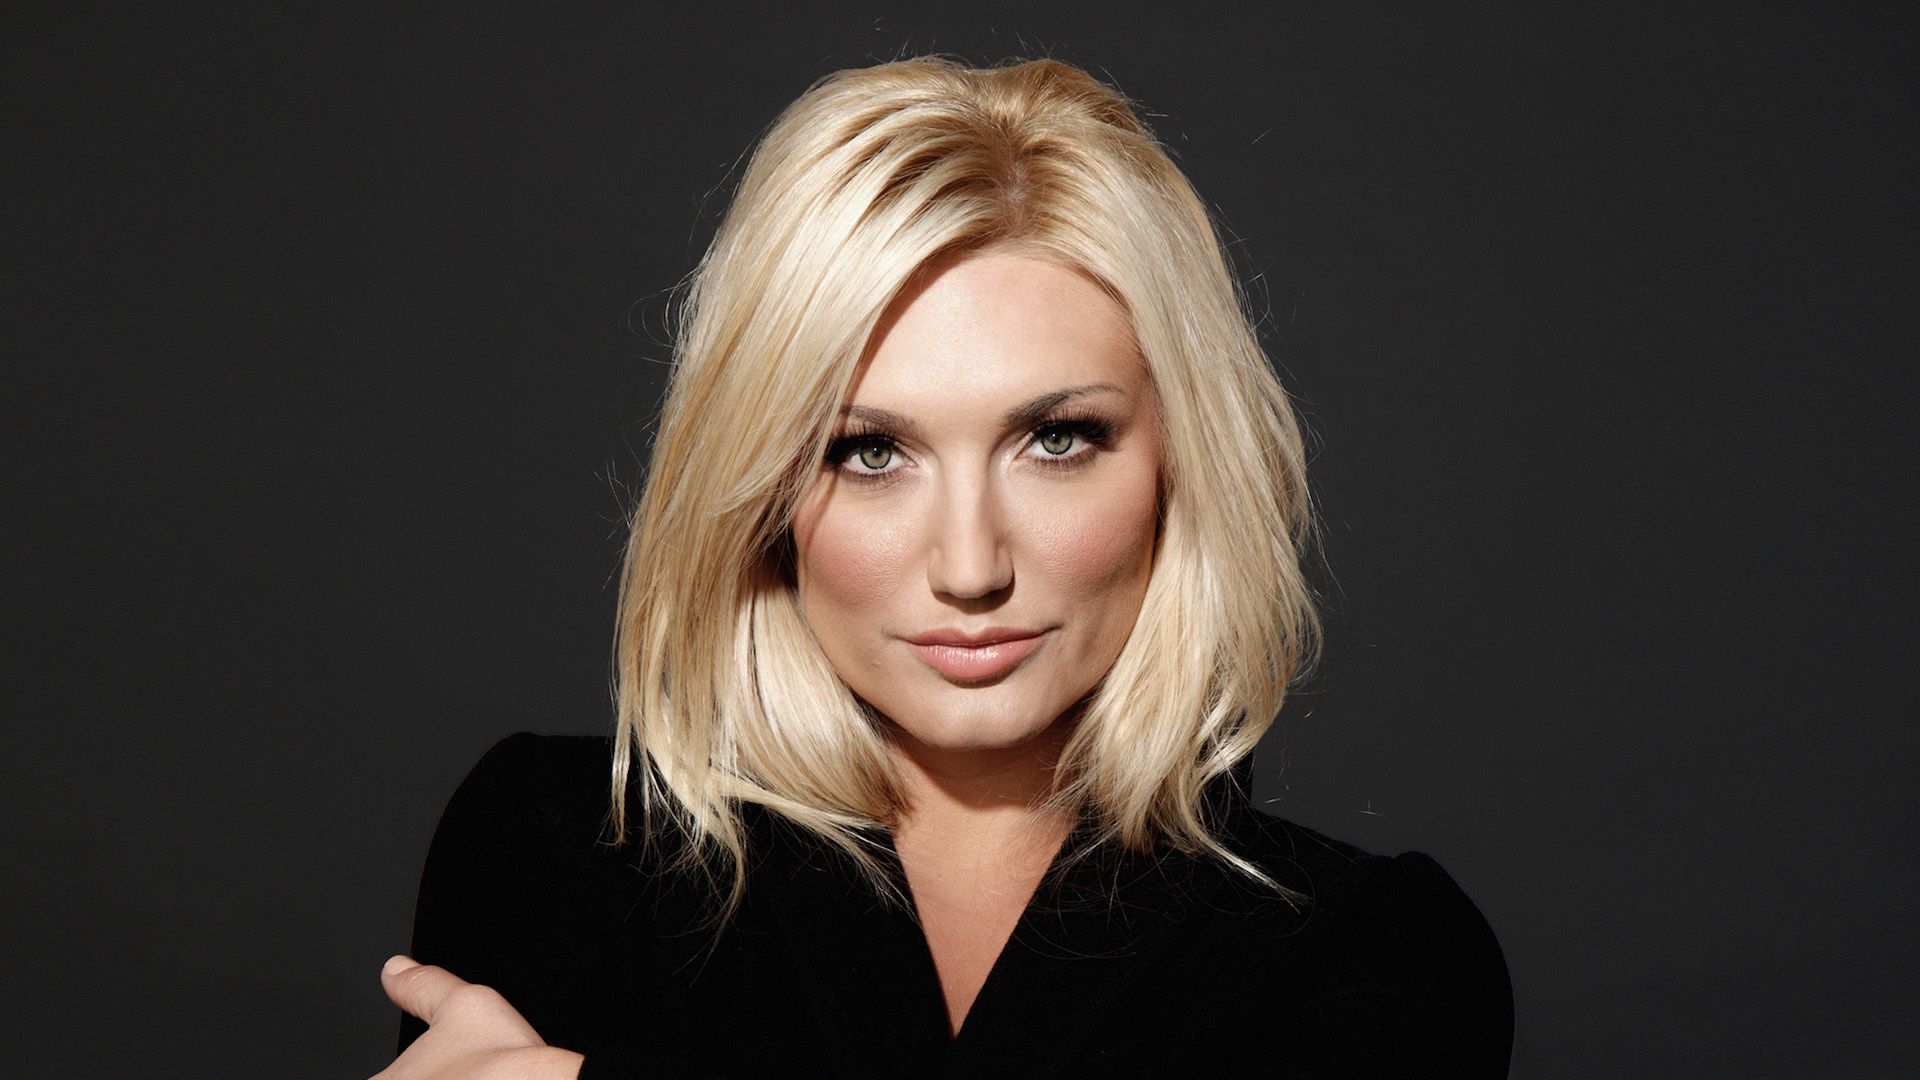 Where's Brooke Hogan today? Bio: Married, Marriage, Net Worth, Now, Son Wikiodin.com